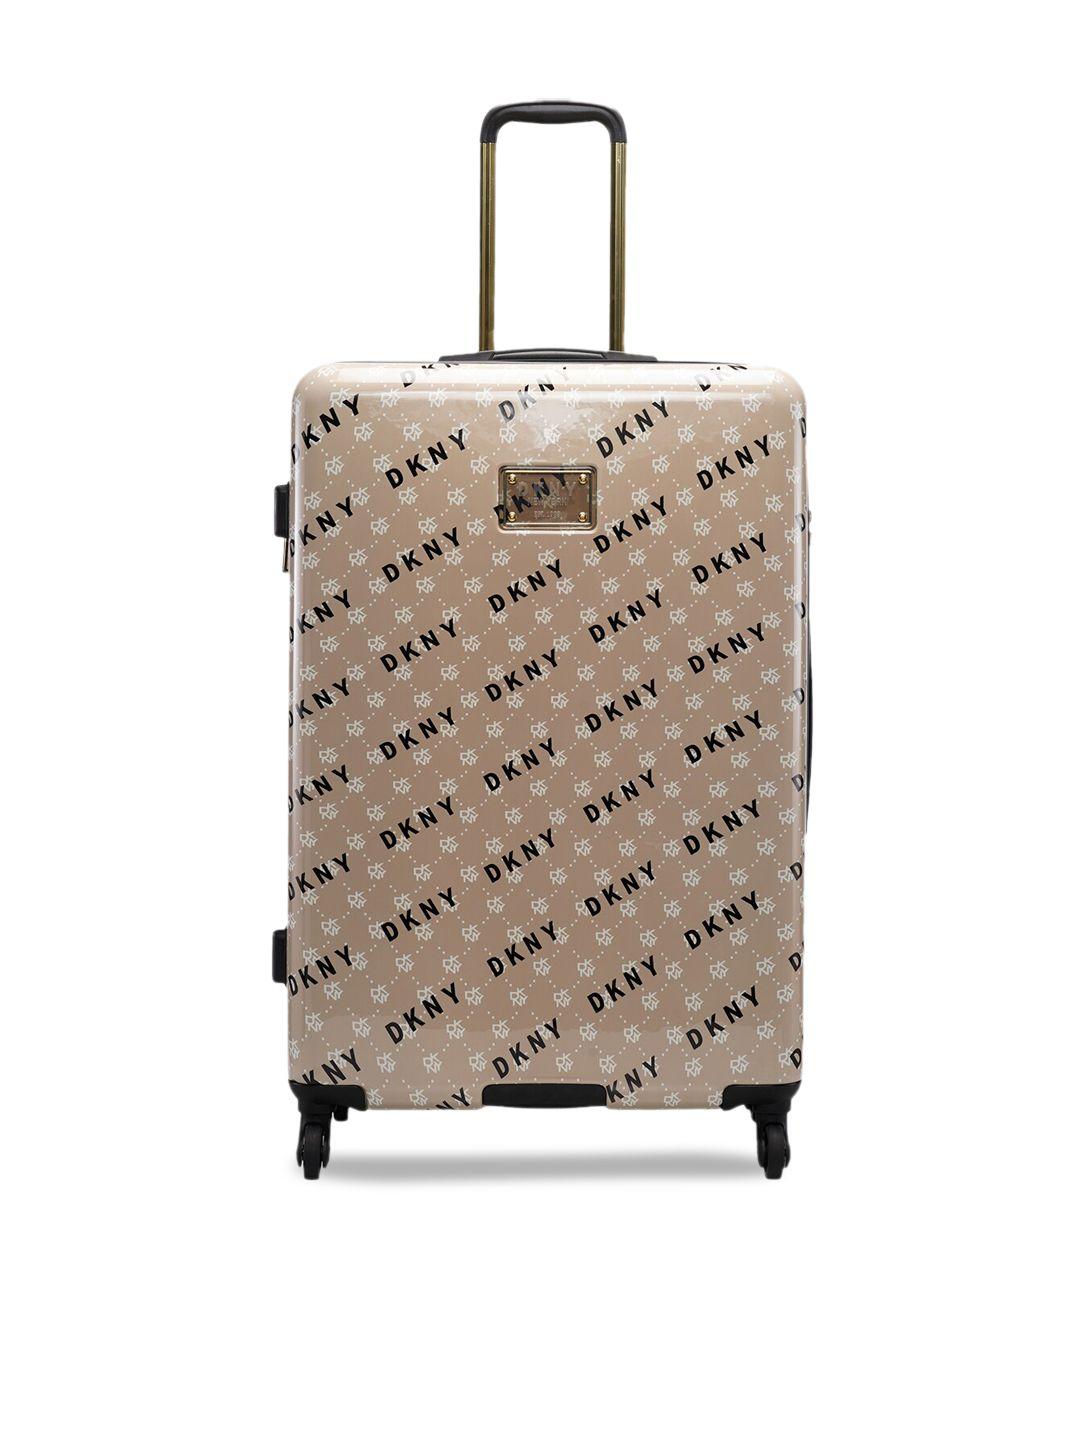 dkny on repeat printed abs material soft-sided large trolley suitcase bag